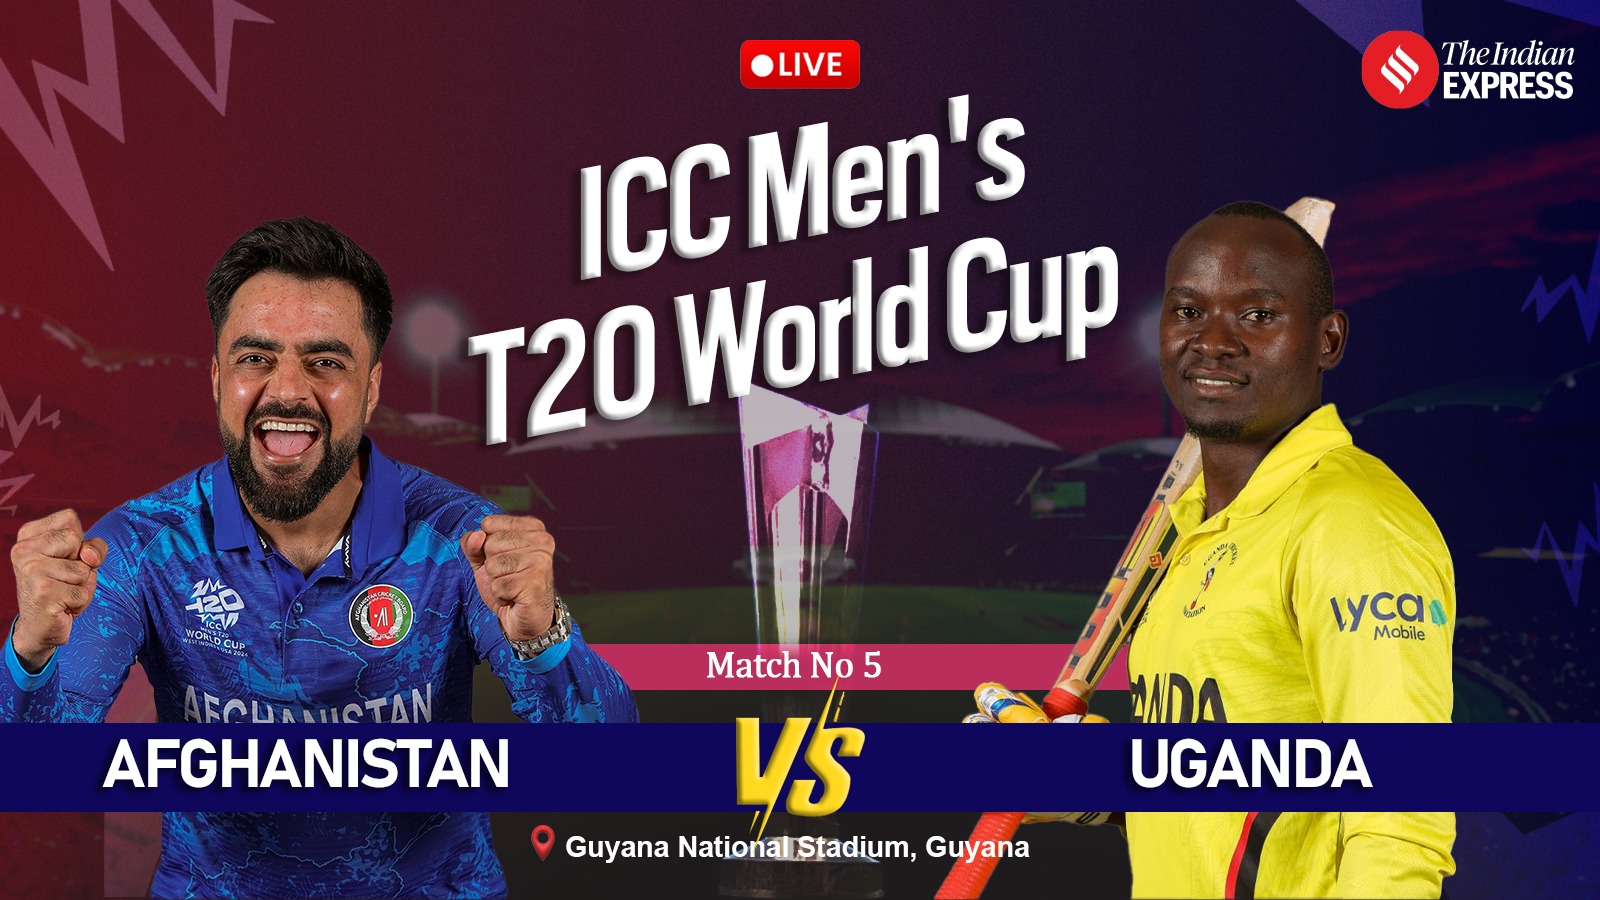 UGA bowls first against AFG in T20 World Cup 2024 match, live score updates from Guyana | Cricket News